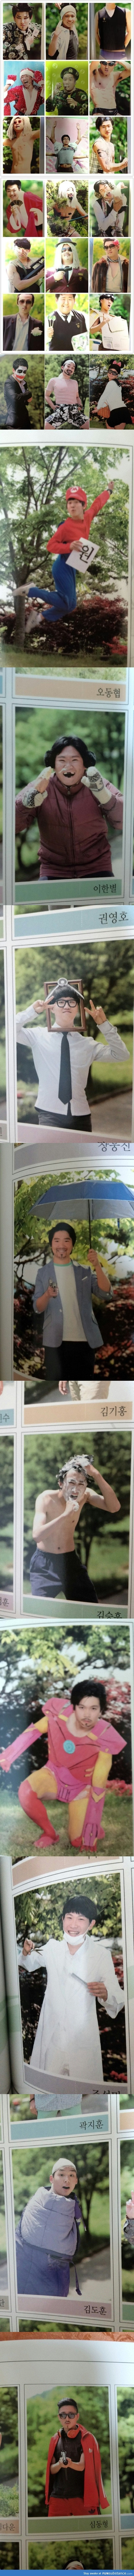 Korean High Schoolers have fun  with their yearbook photos.